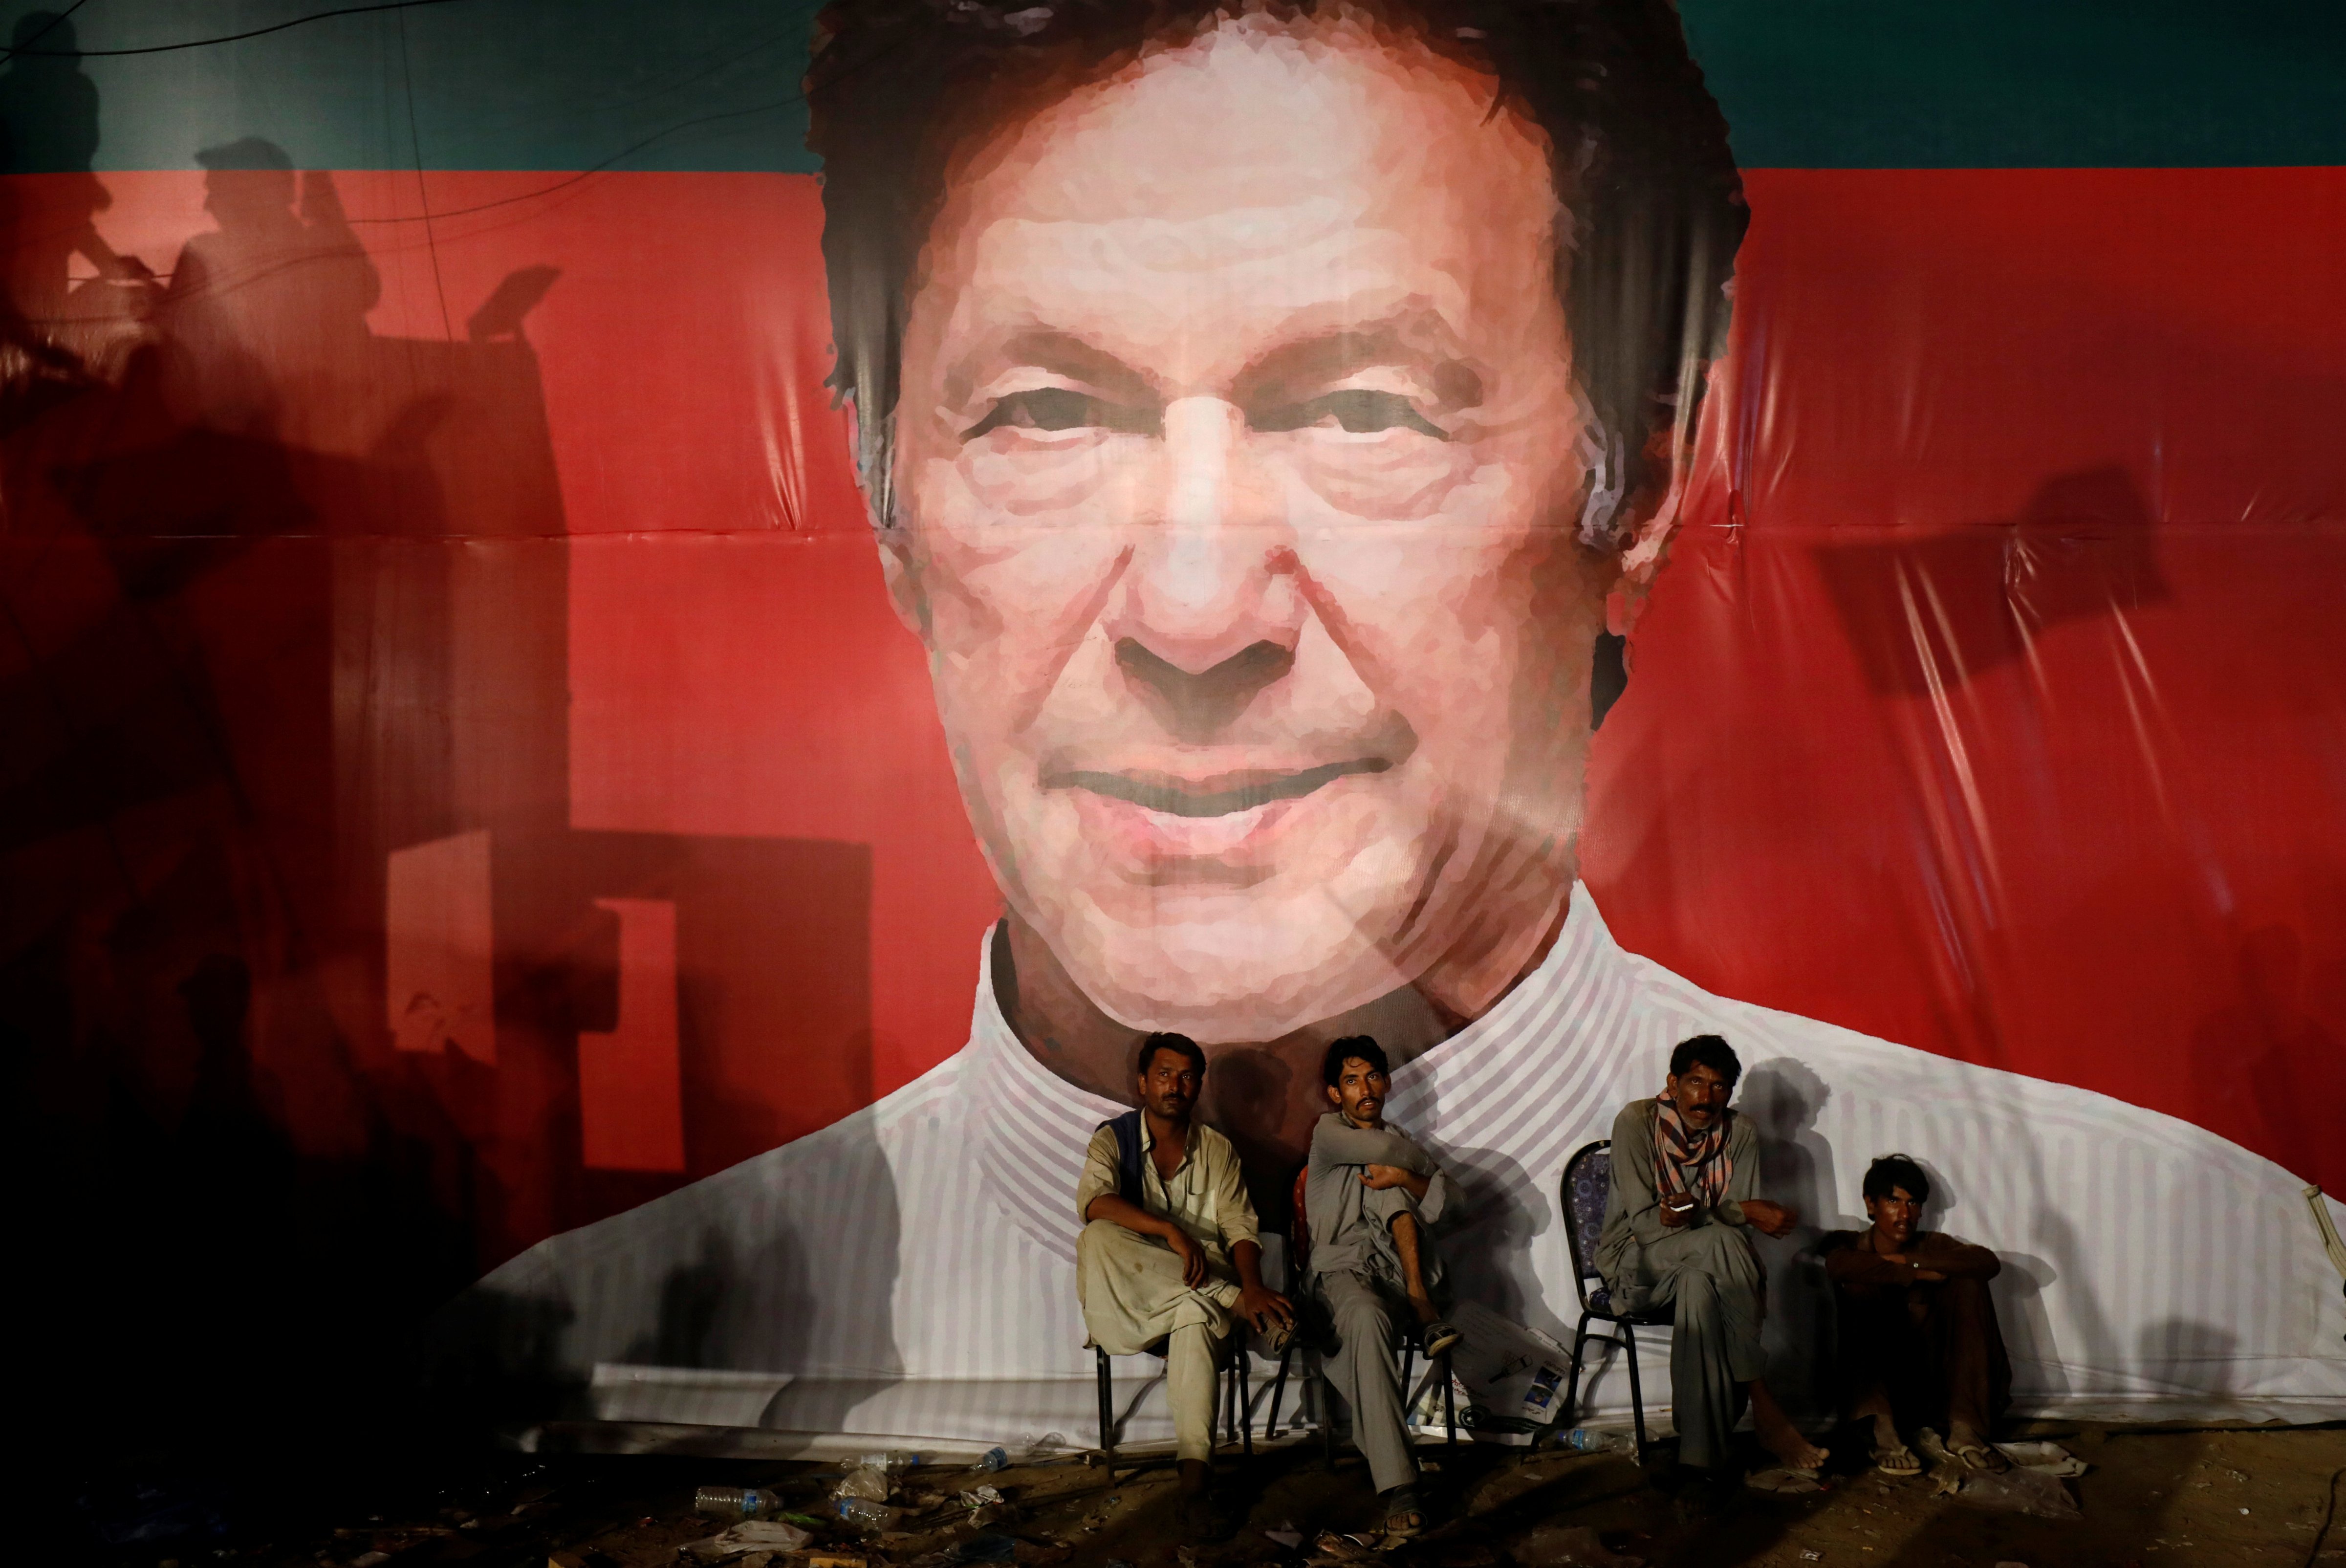 Labourers sit under a wall with a billboard displaying photo of Imran Khan, chairman of the Pakistan Tehreek-e-Insaf political party,  during a campaign rally ahead of general elections in Karachi, Pakistan July 22, 2018. (Akhtar Soomro—Reuters)